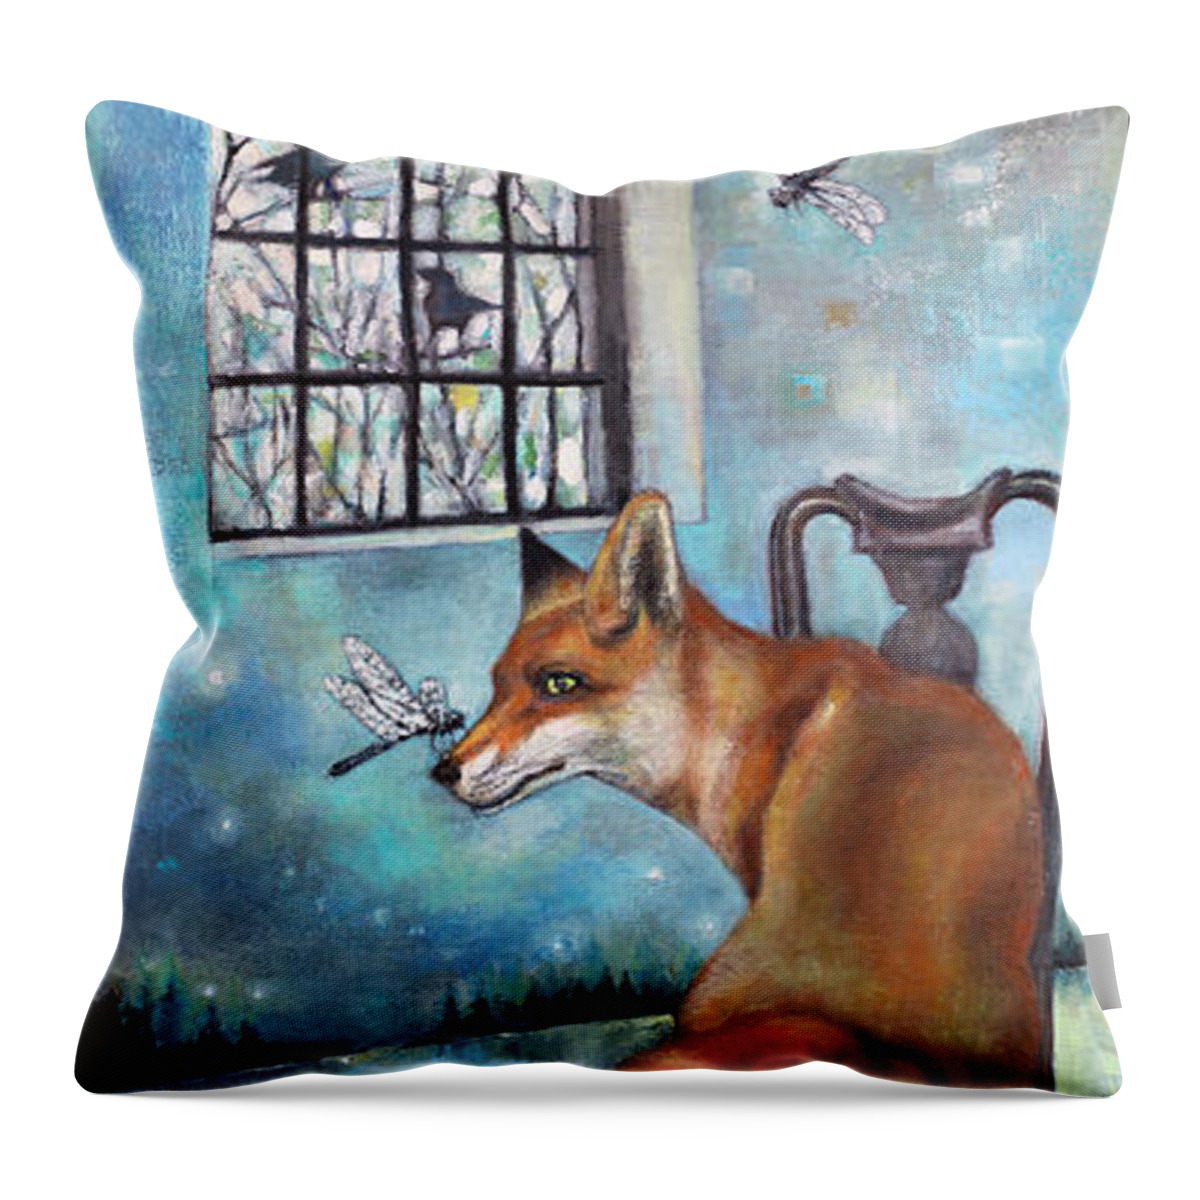 Fox Throw Pillow featuring the painting Inside Forest by Manami Lingerfelt